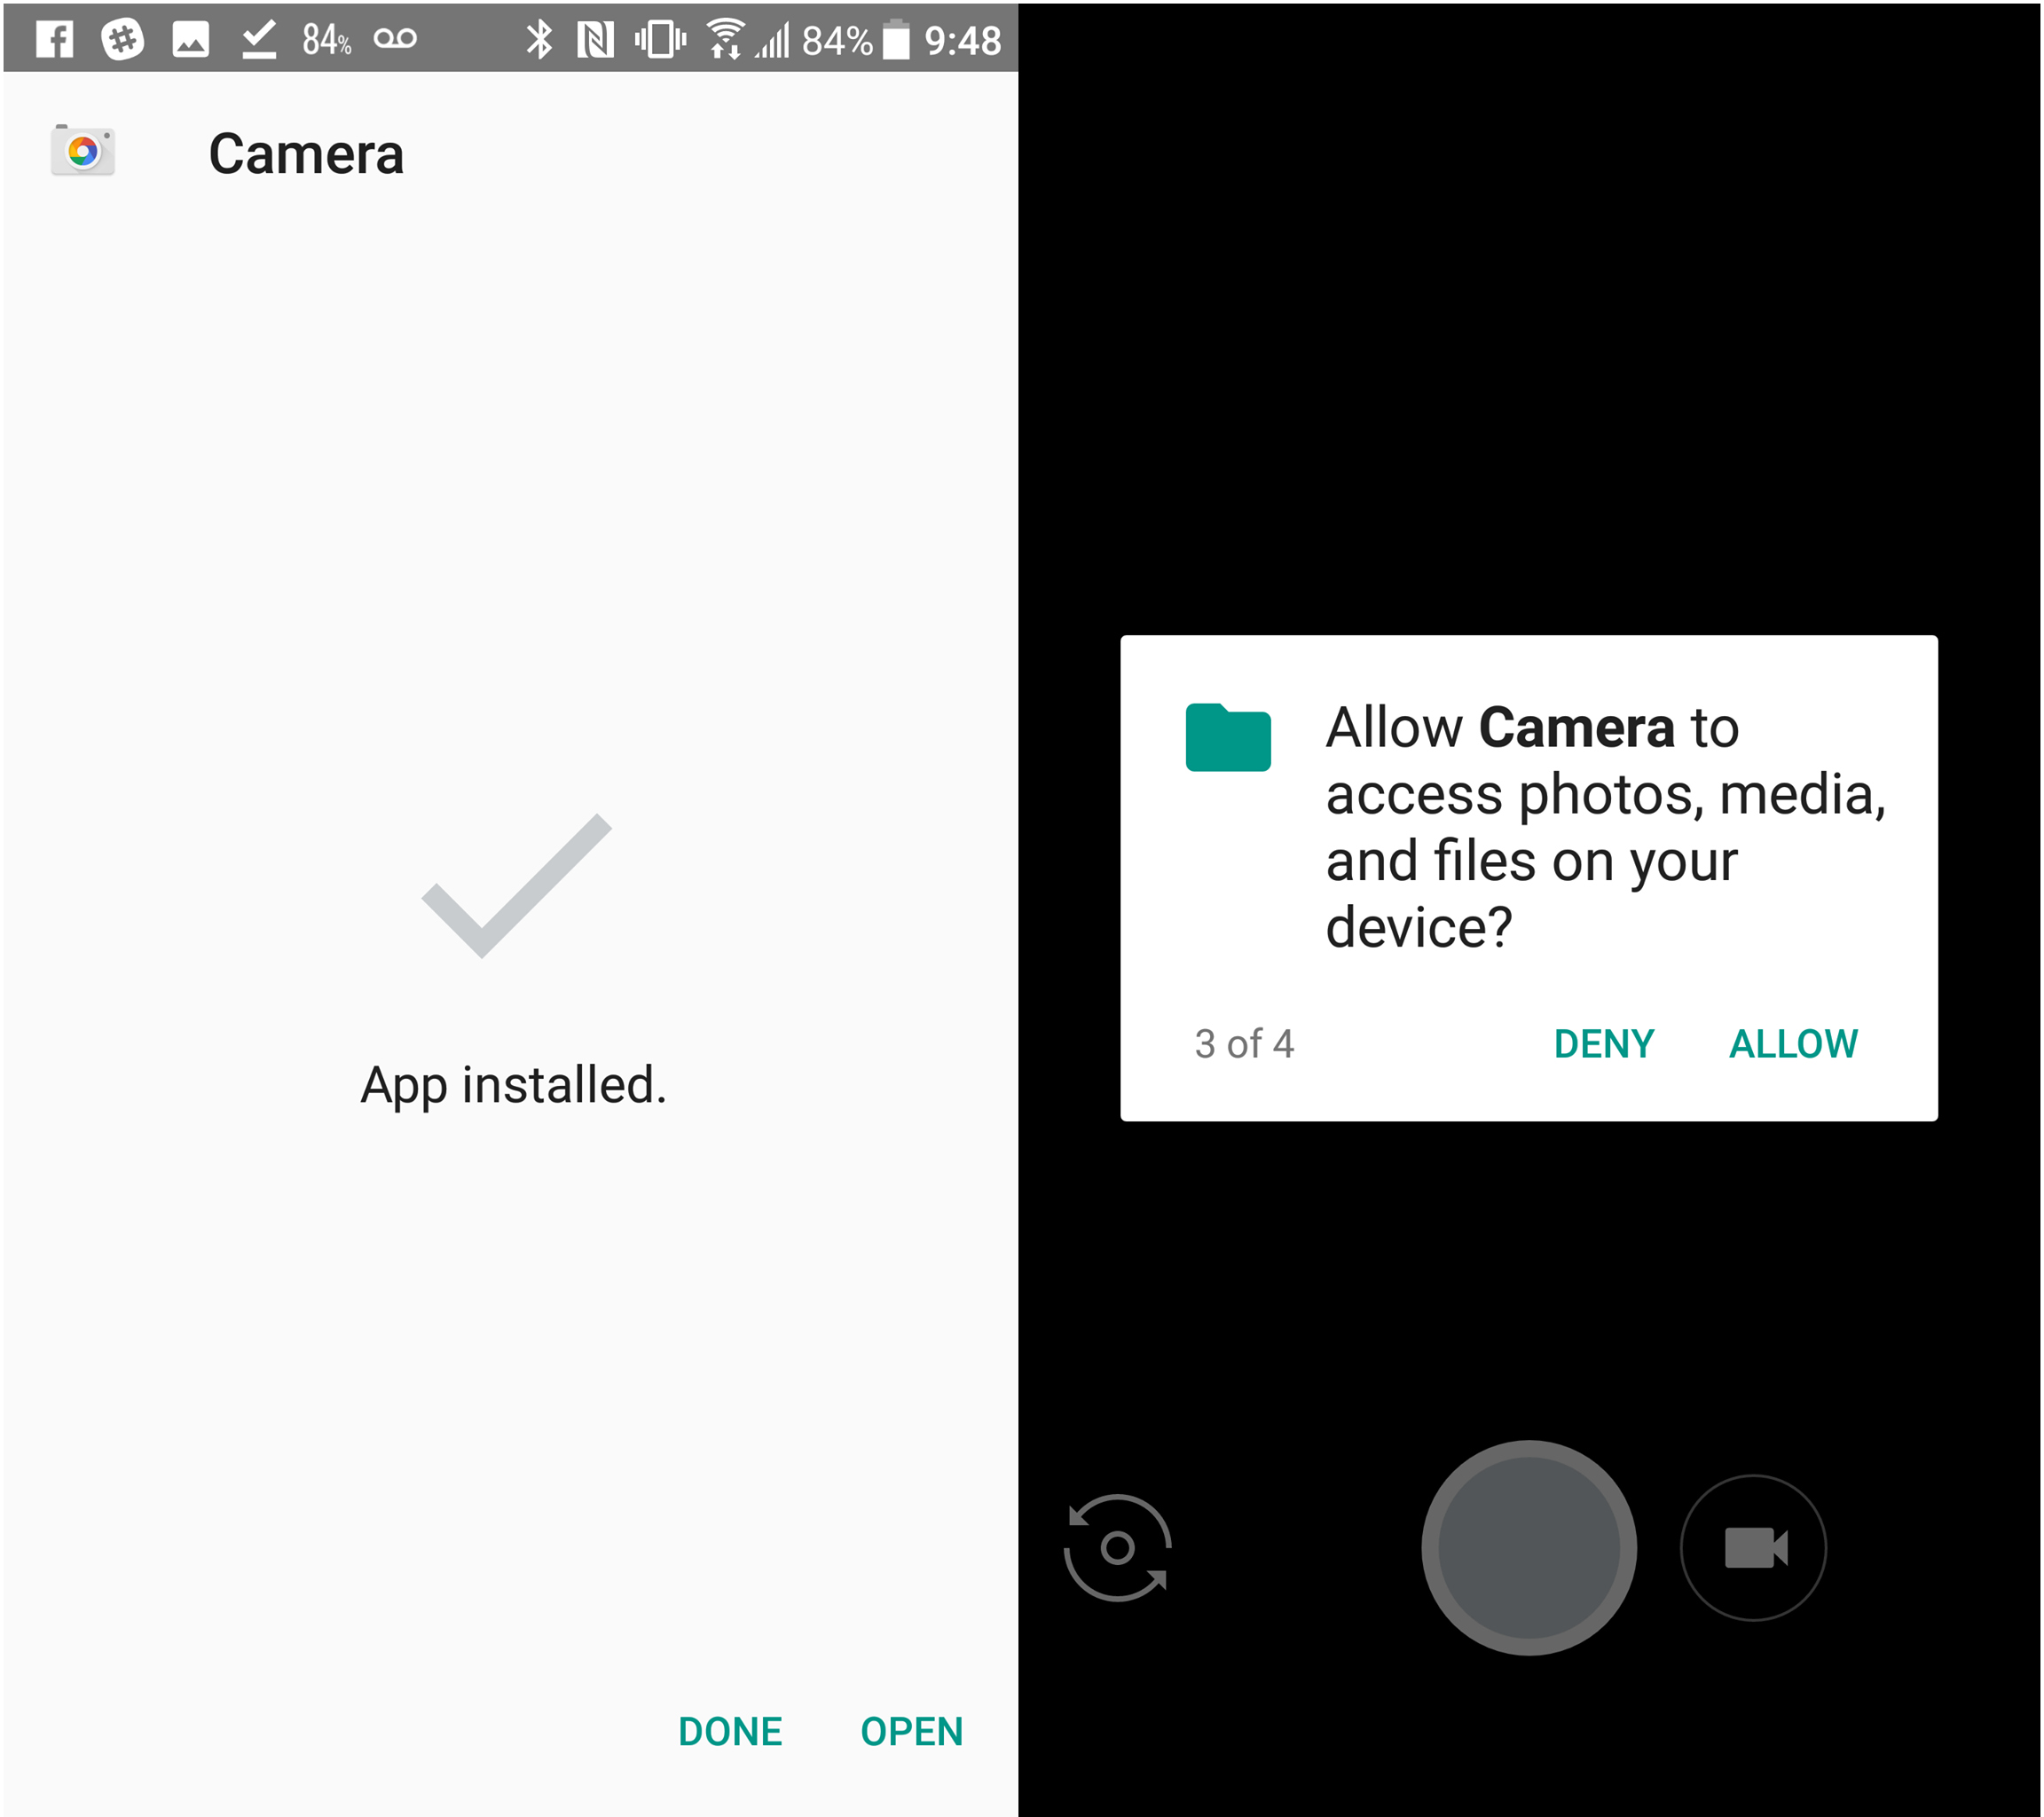 An image showing the Pixel camera installed on an Android phone